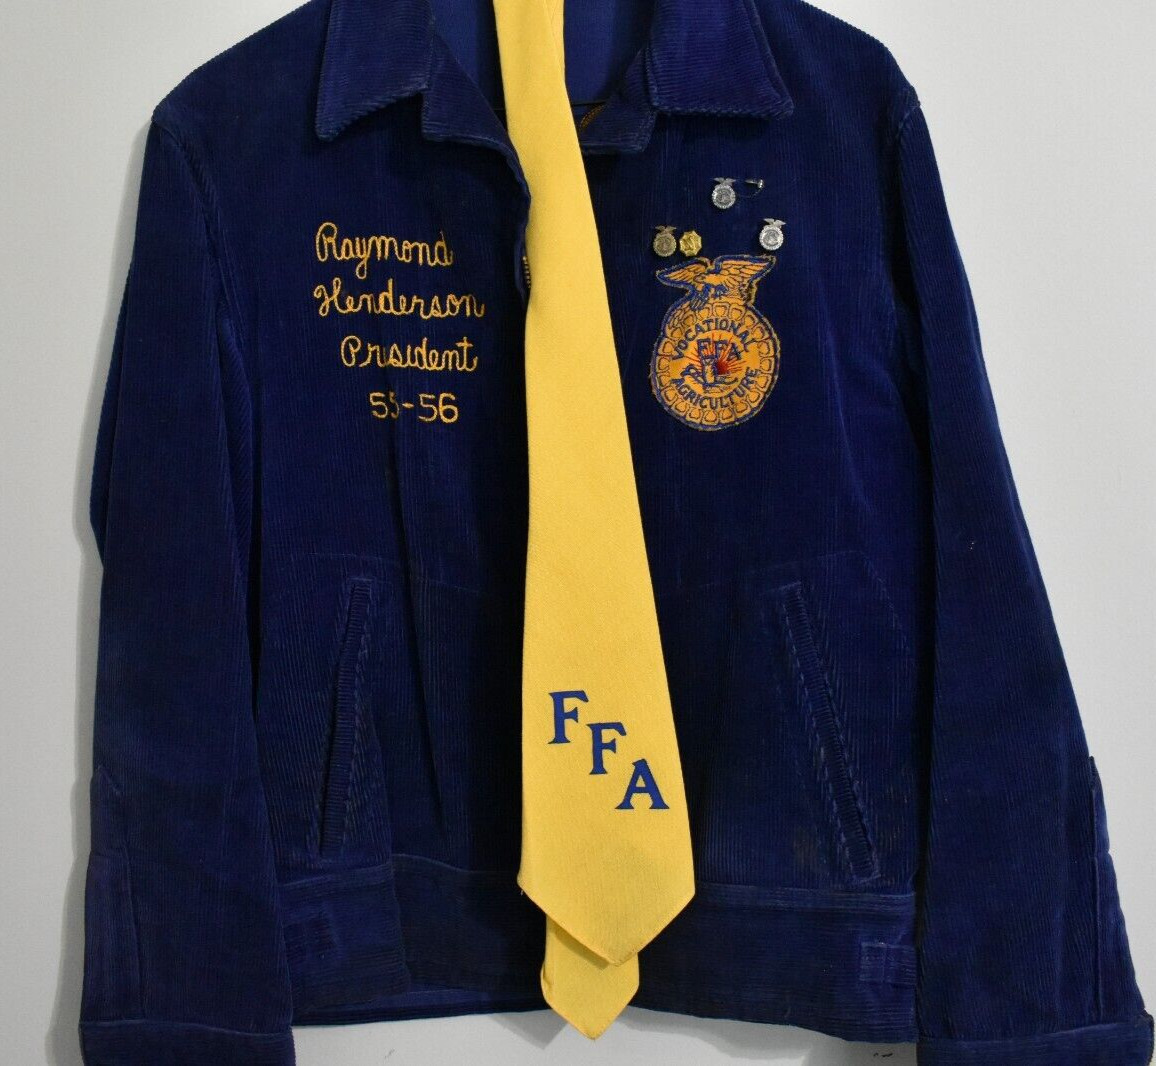 Future Farmers Of America FFA Vintage 1950's Jacket Men's 36  With Pins & Tie